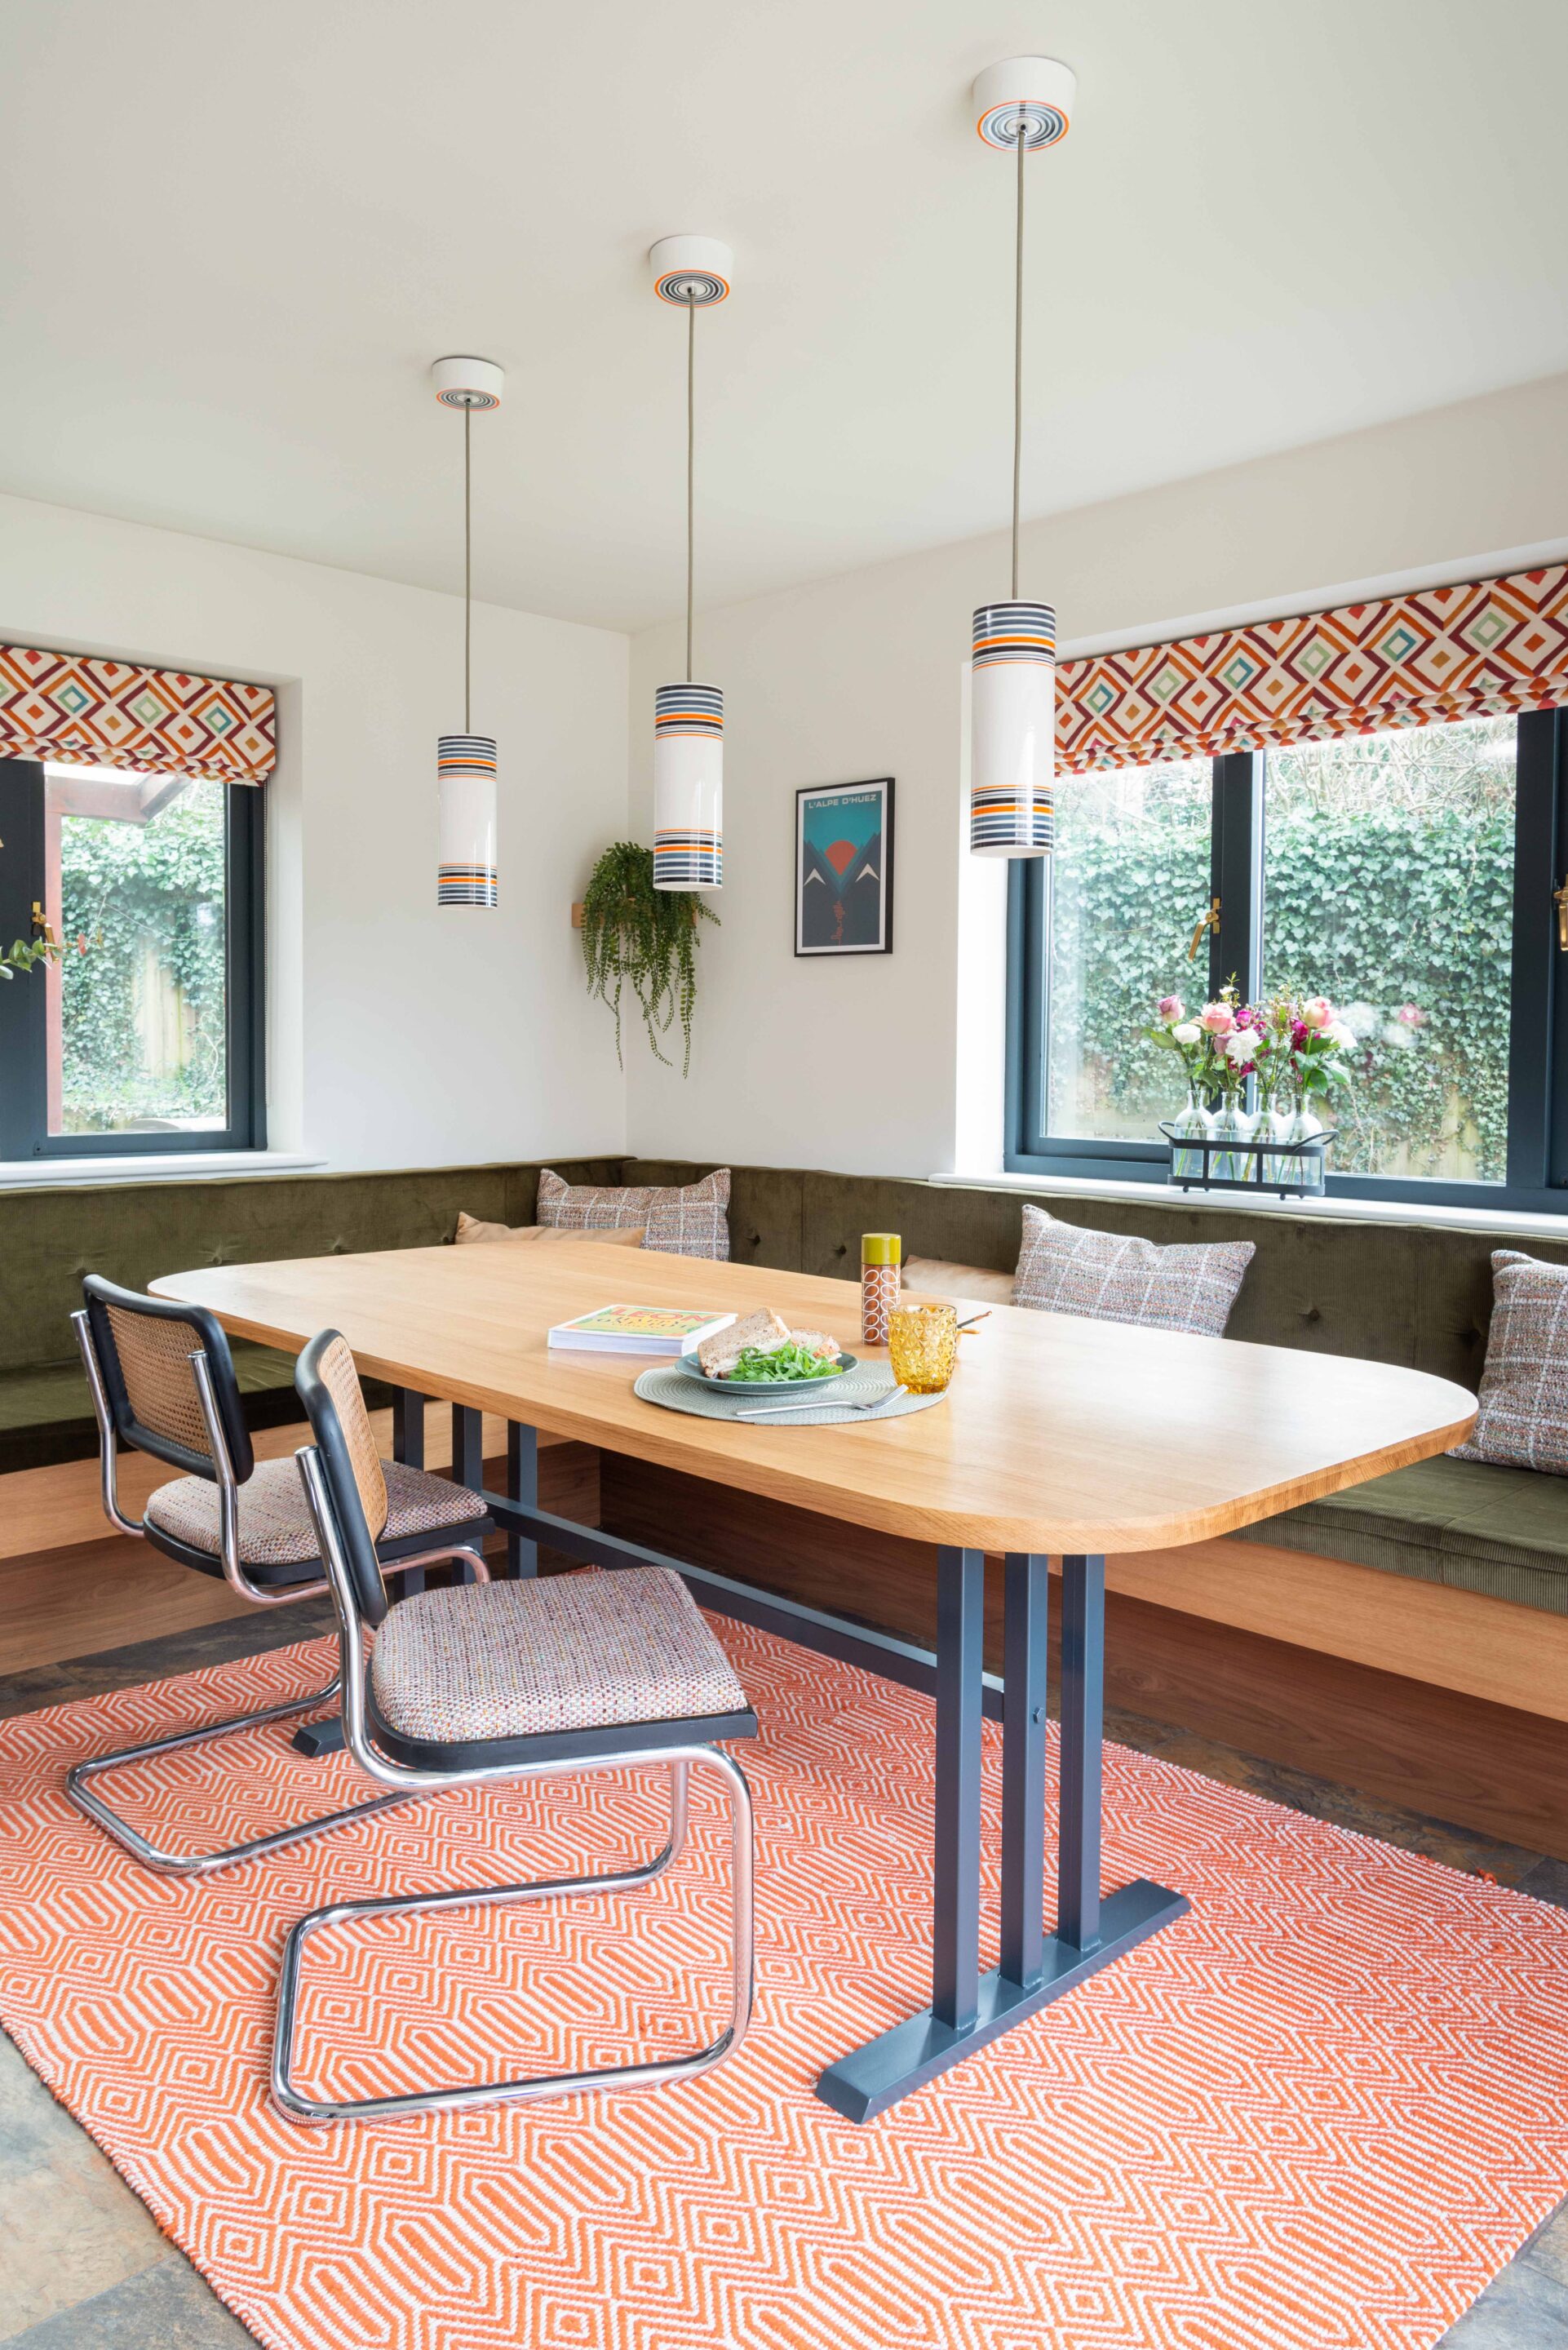 Bespoke dining table with banquette seating and pendant lights over